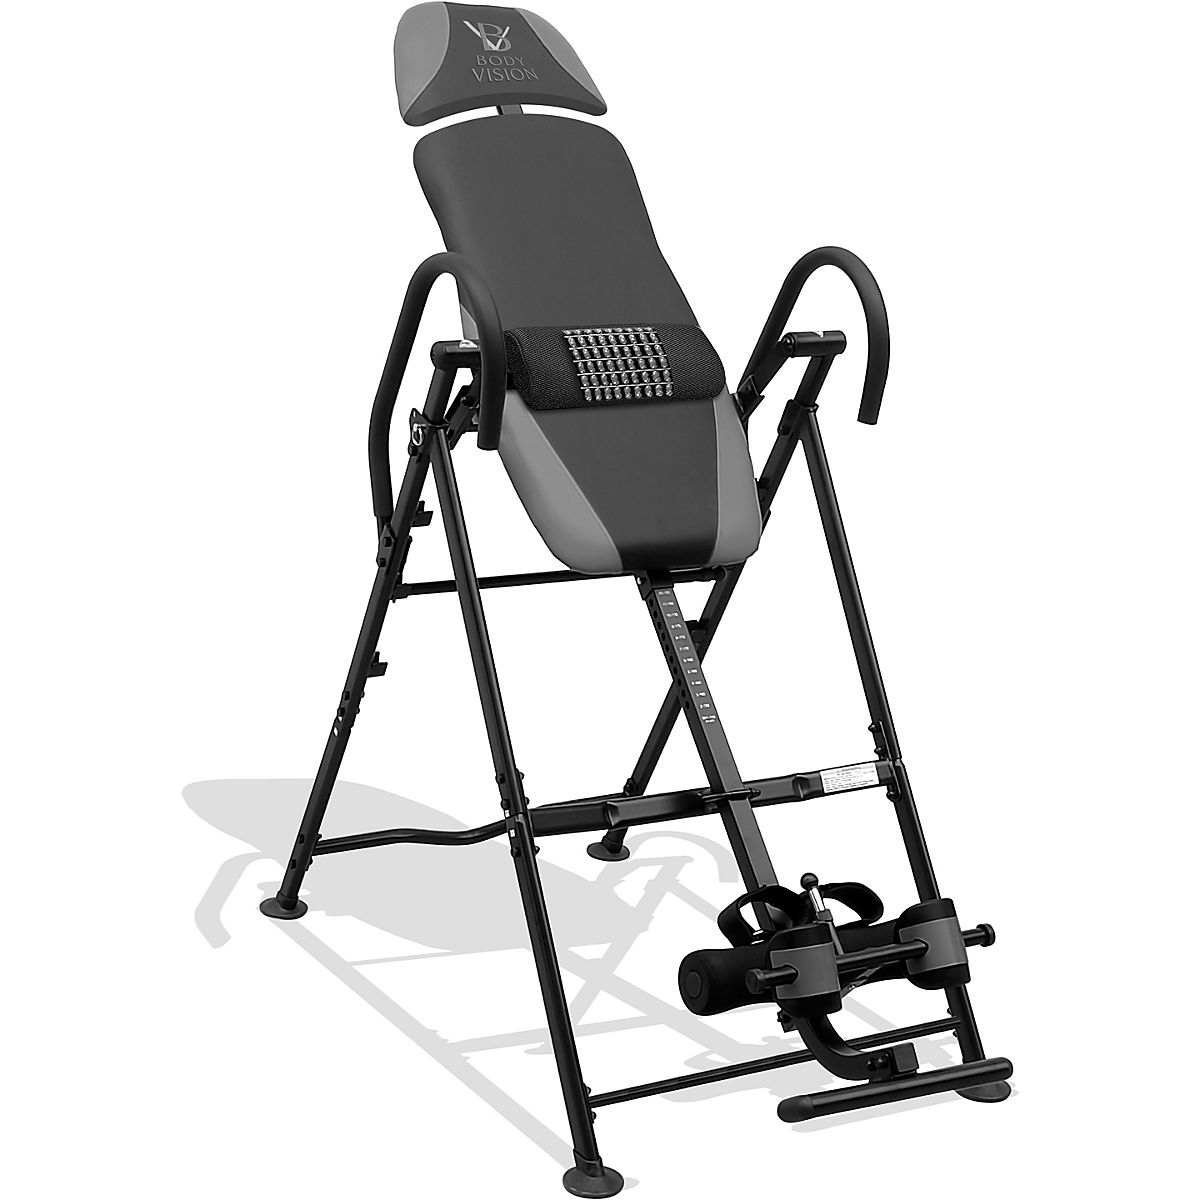 Inversion Tables for sale in Mexico City, Mexico